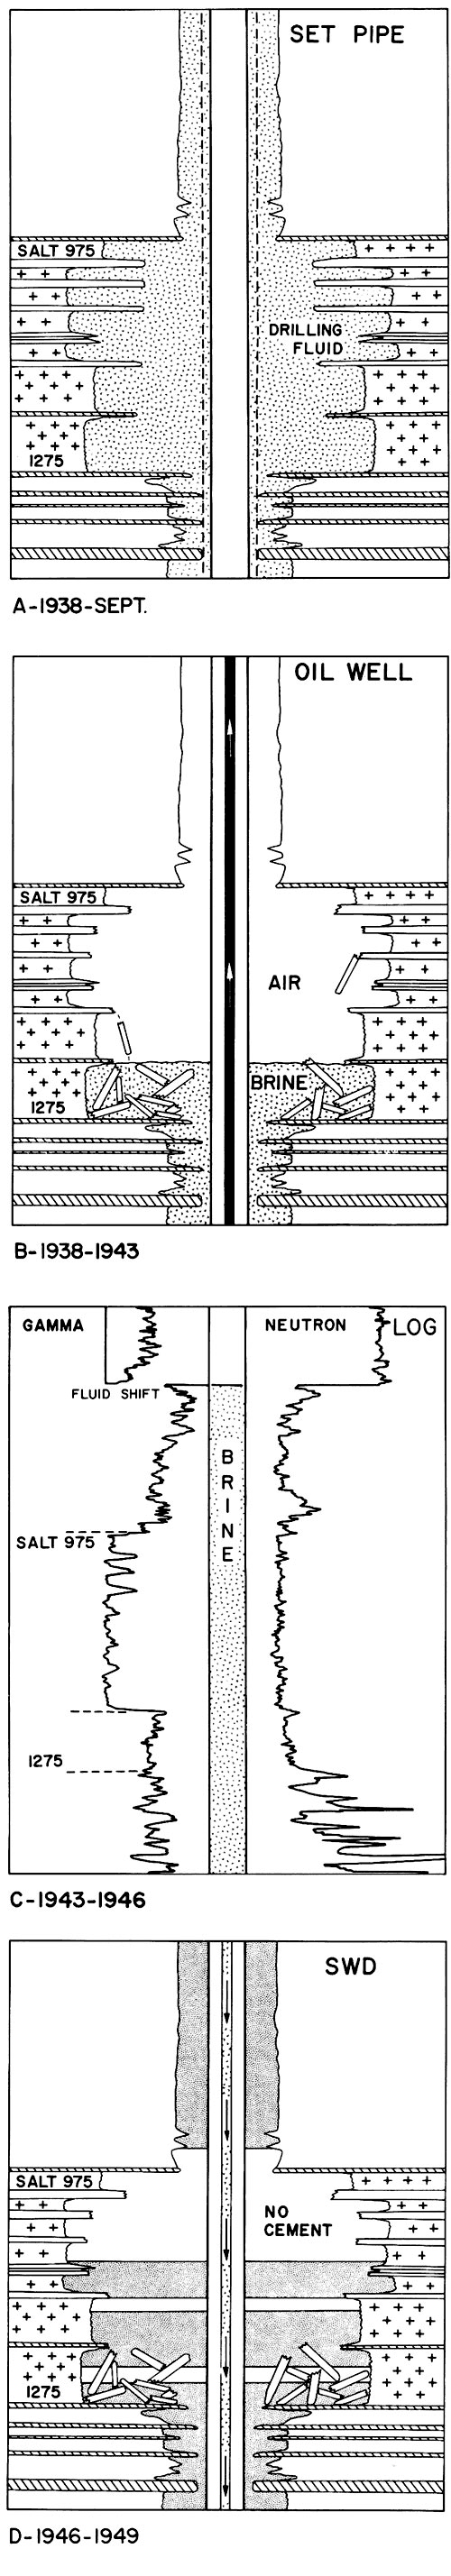 Diagram of salt section in Panning 11A.